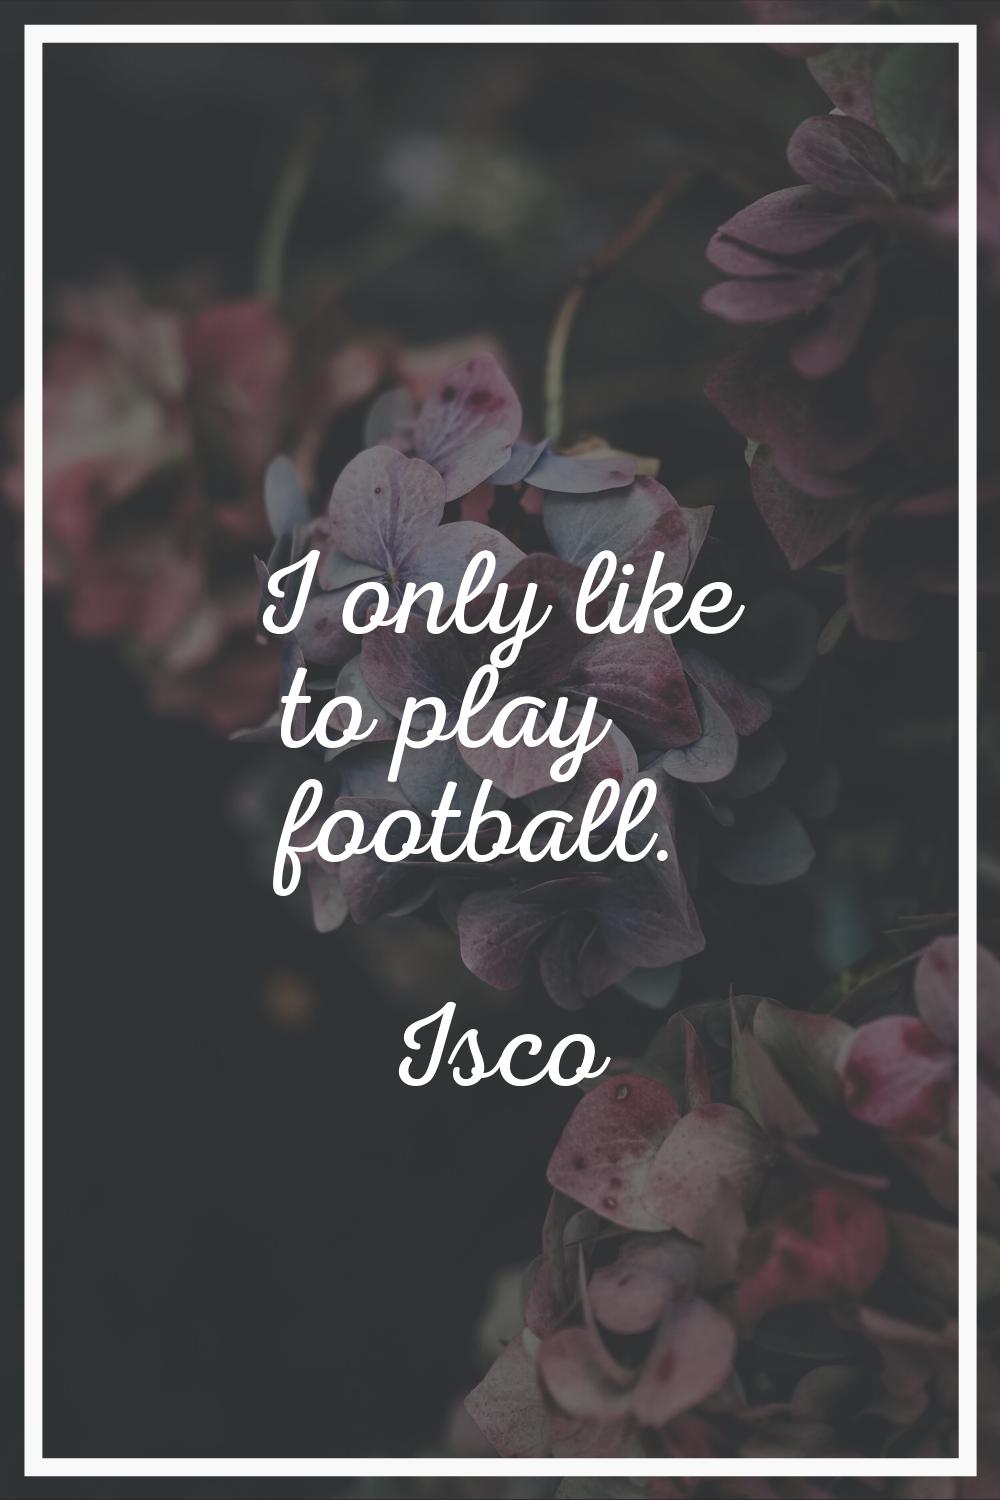 I only like to play football.